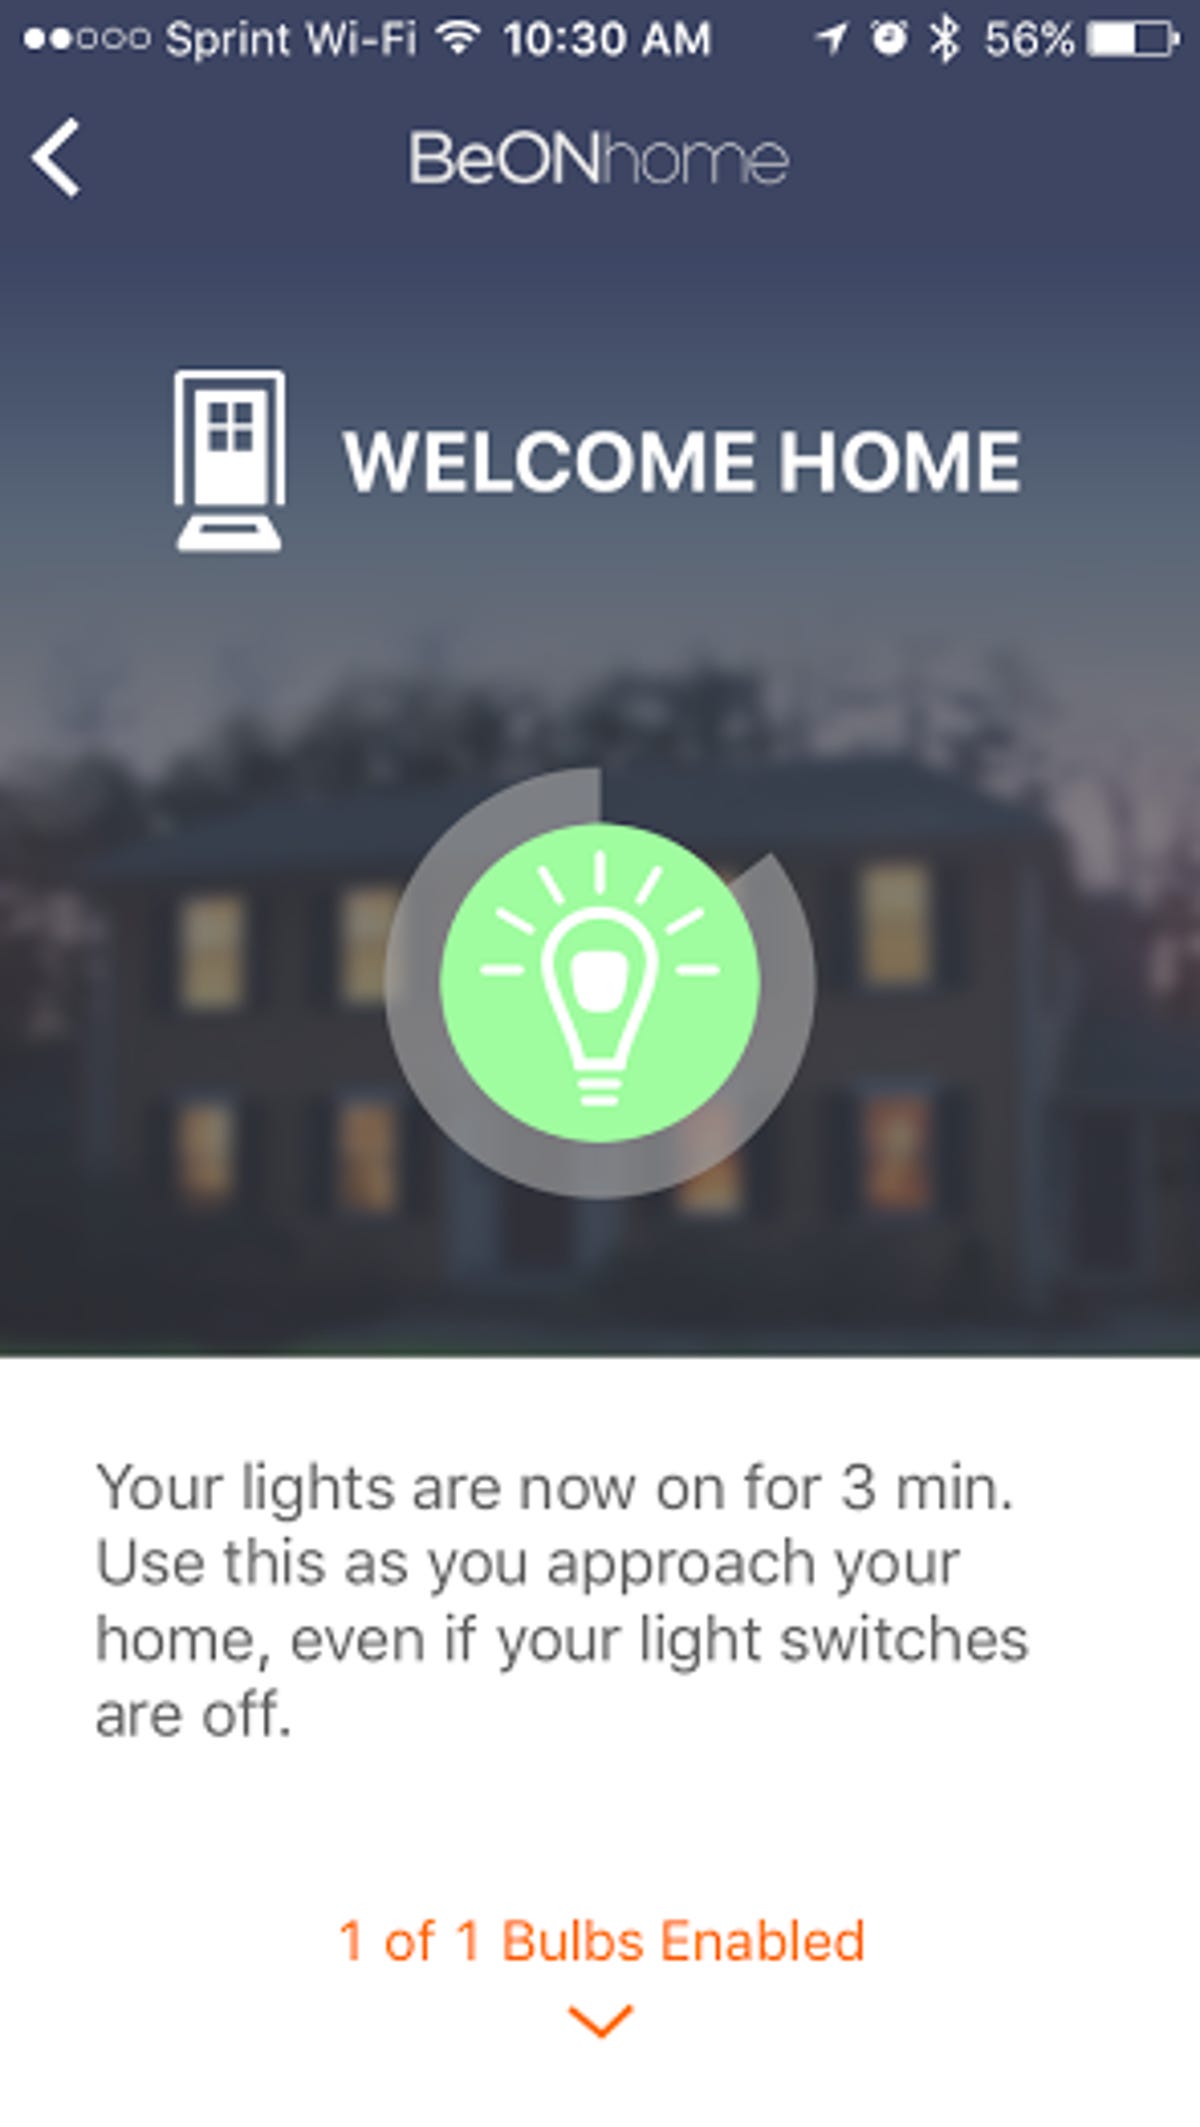 beon-app-welcome-home.png